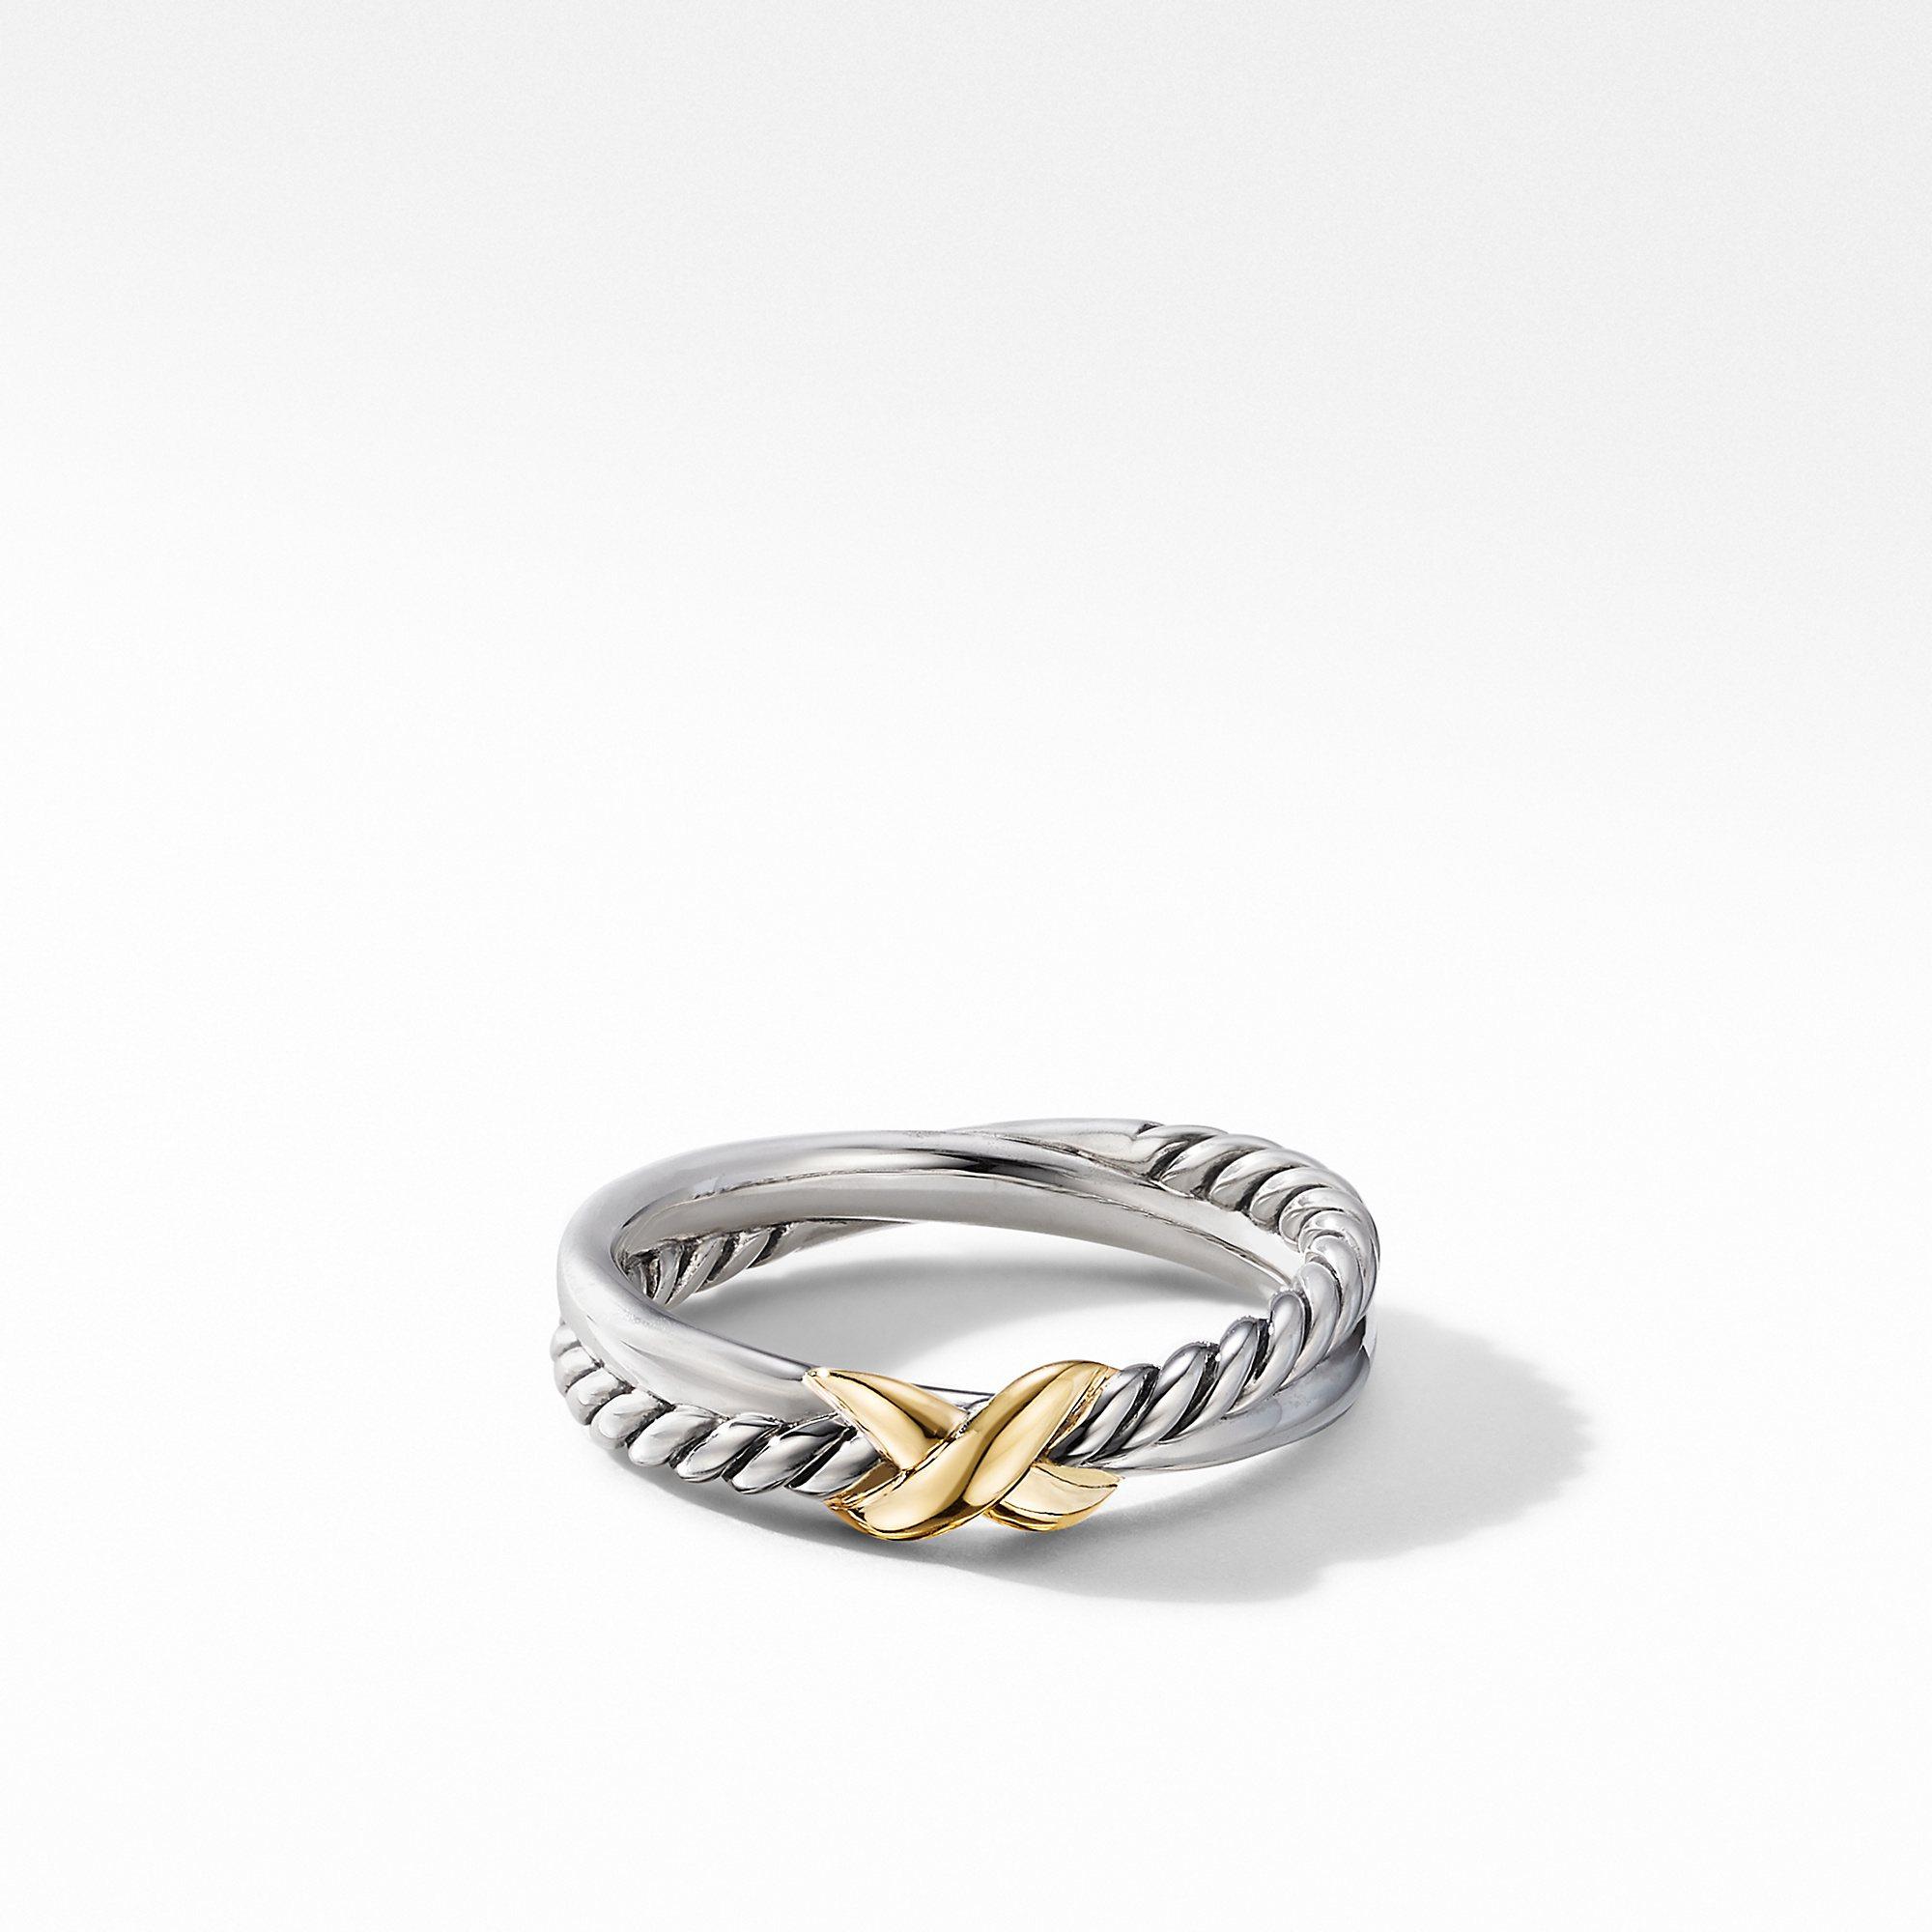 David Yurman Petite X Ring in Sterling Silver with 18k Yellow Gold, size 7